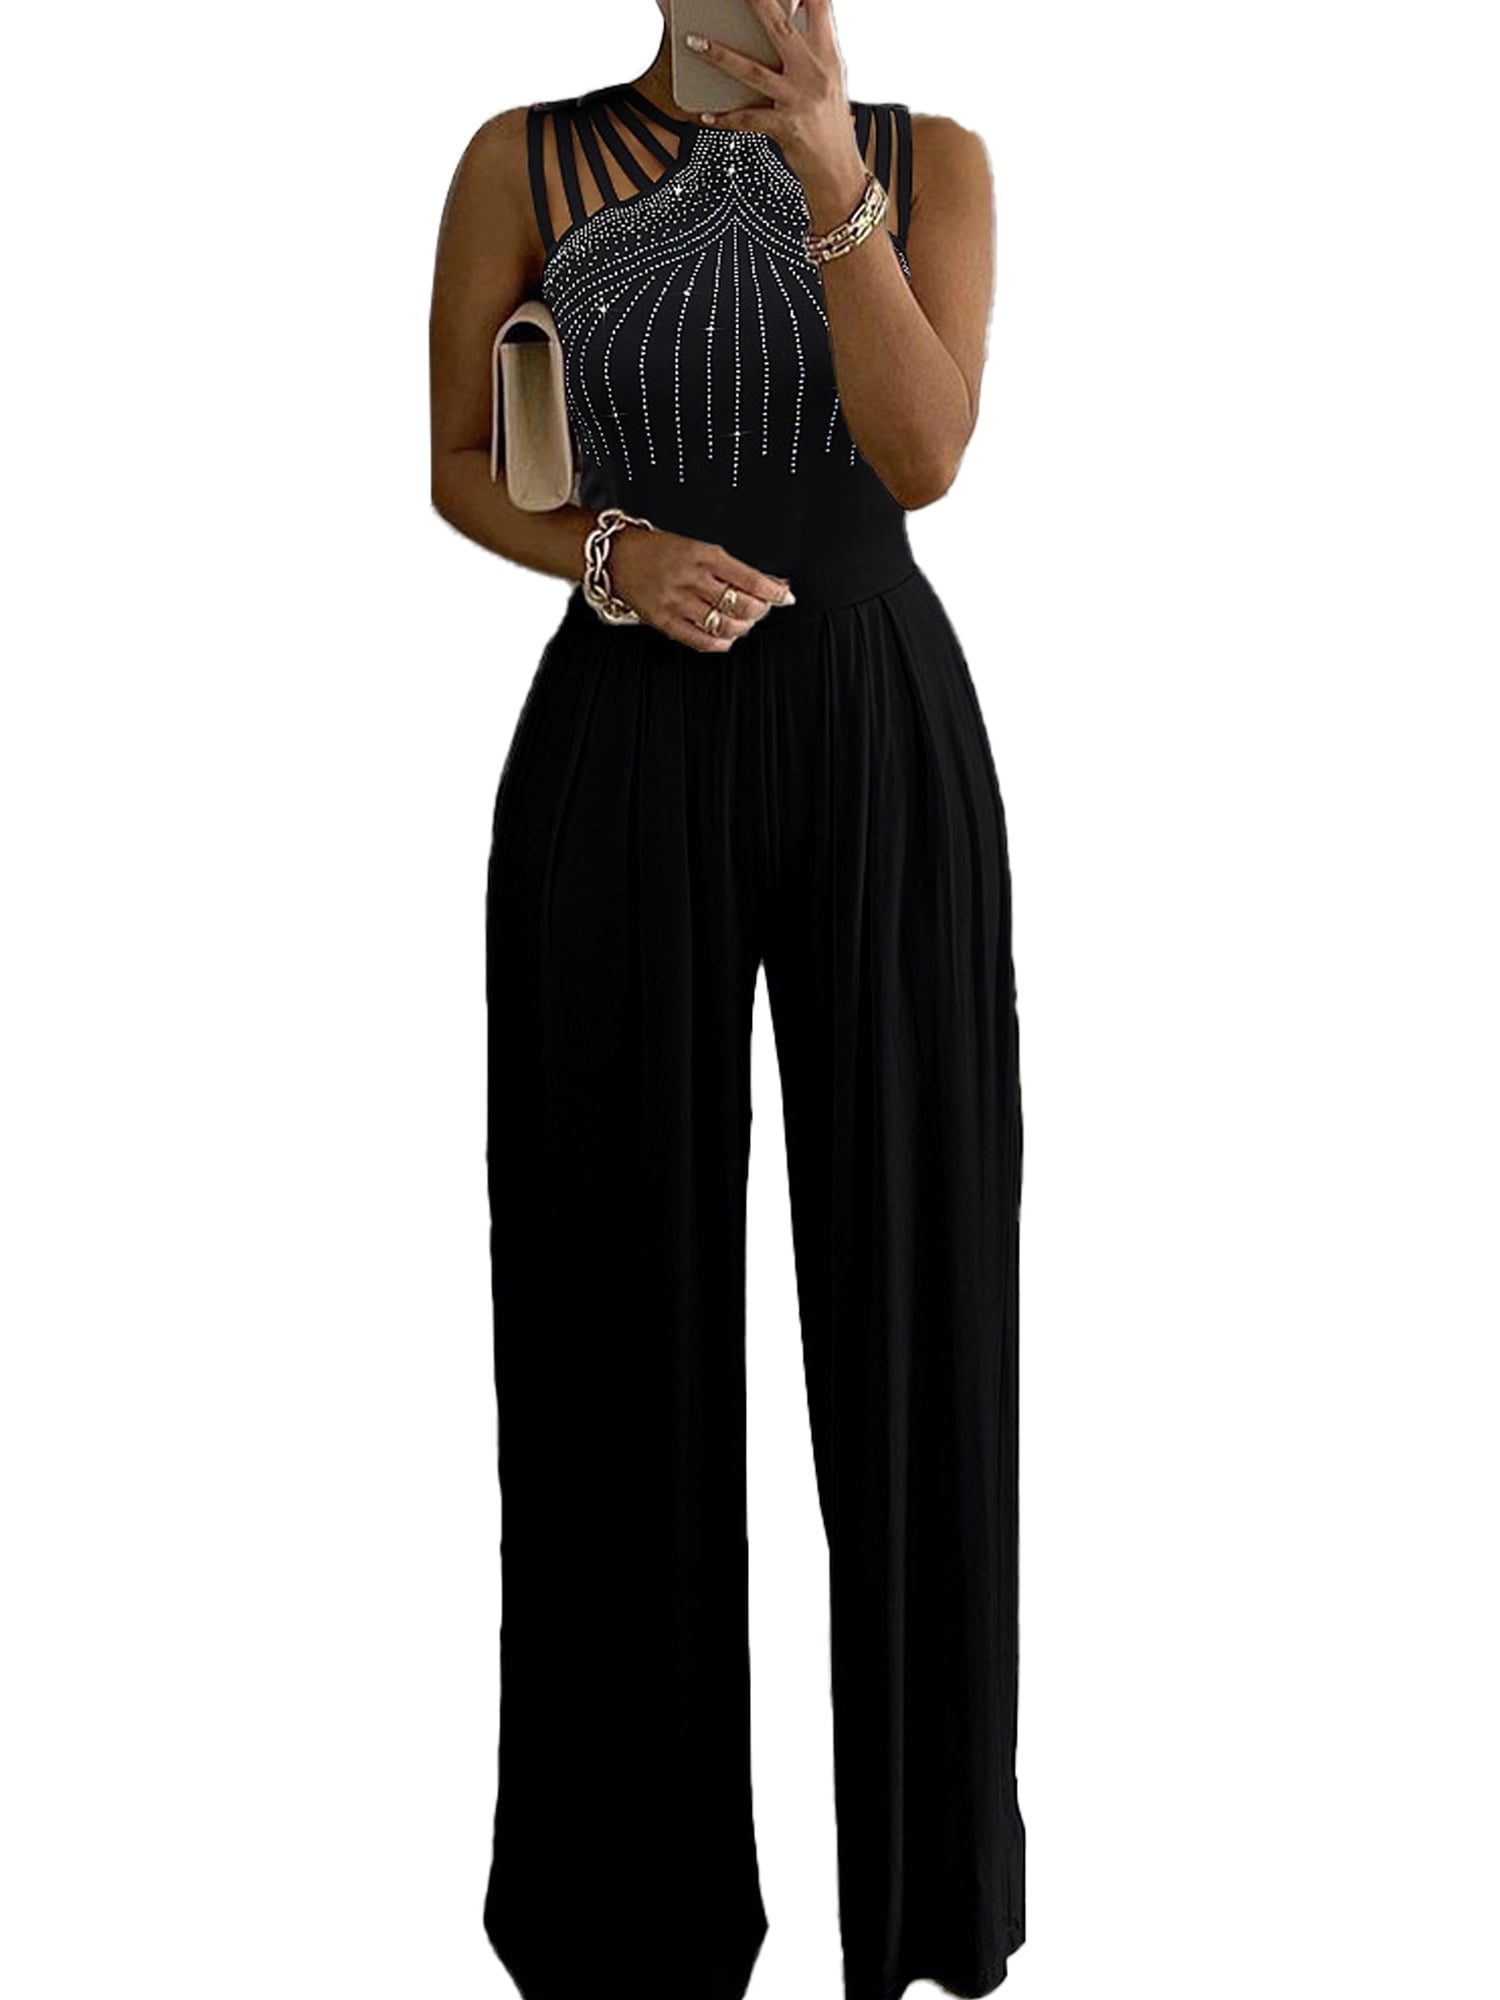 Uerlsty Women Formal Sequin Jumpsuit Sleeveless Wide Leg Evening Cocktail  Party Playsuit 